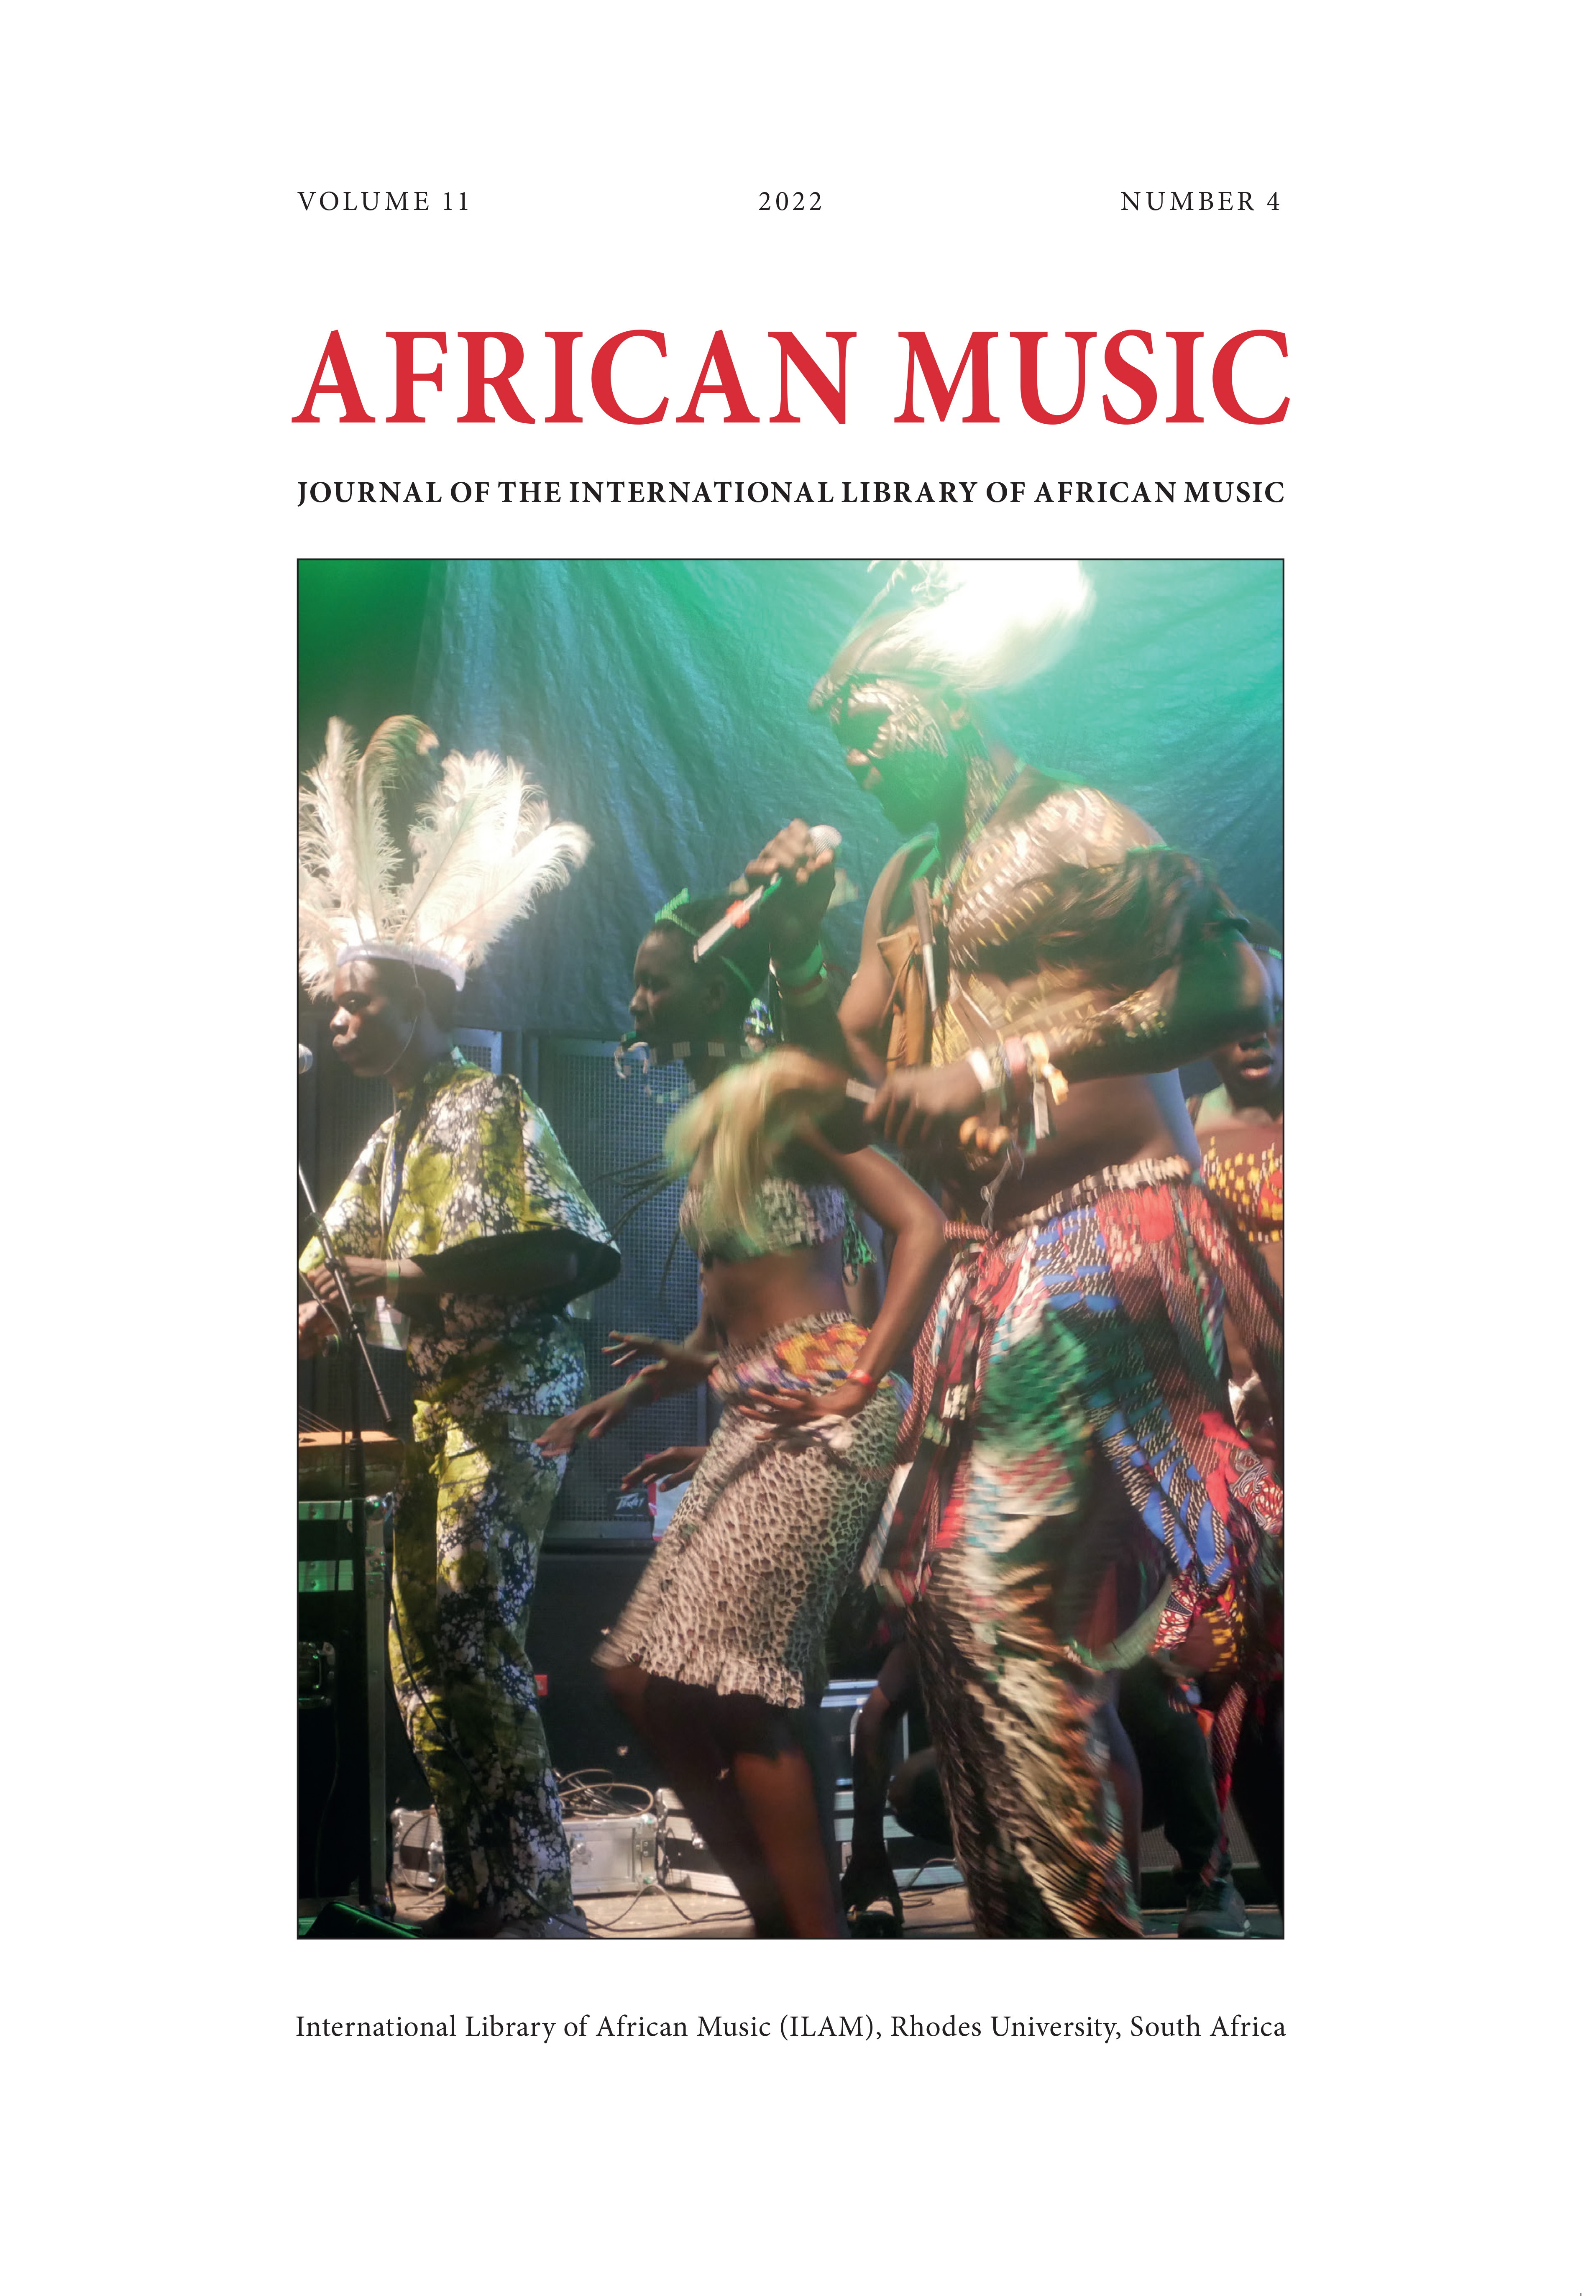 African Music Journal Vol. 11 no. 4 cover page